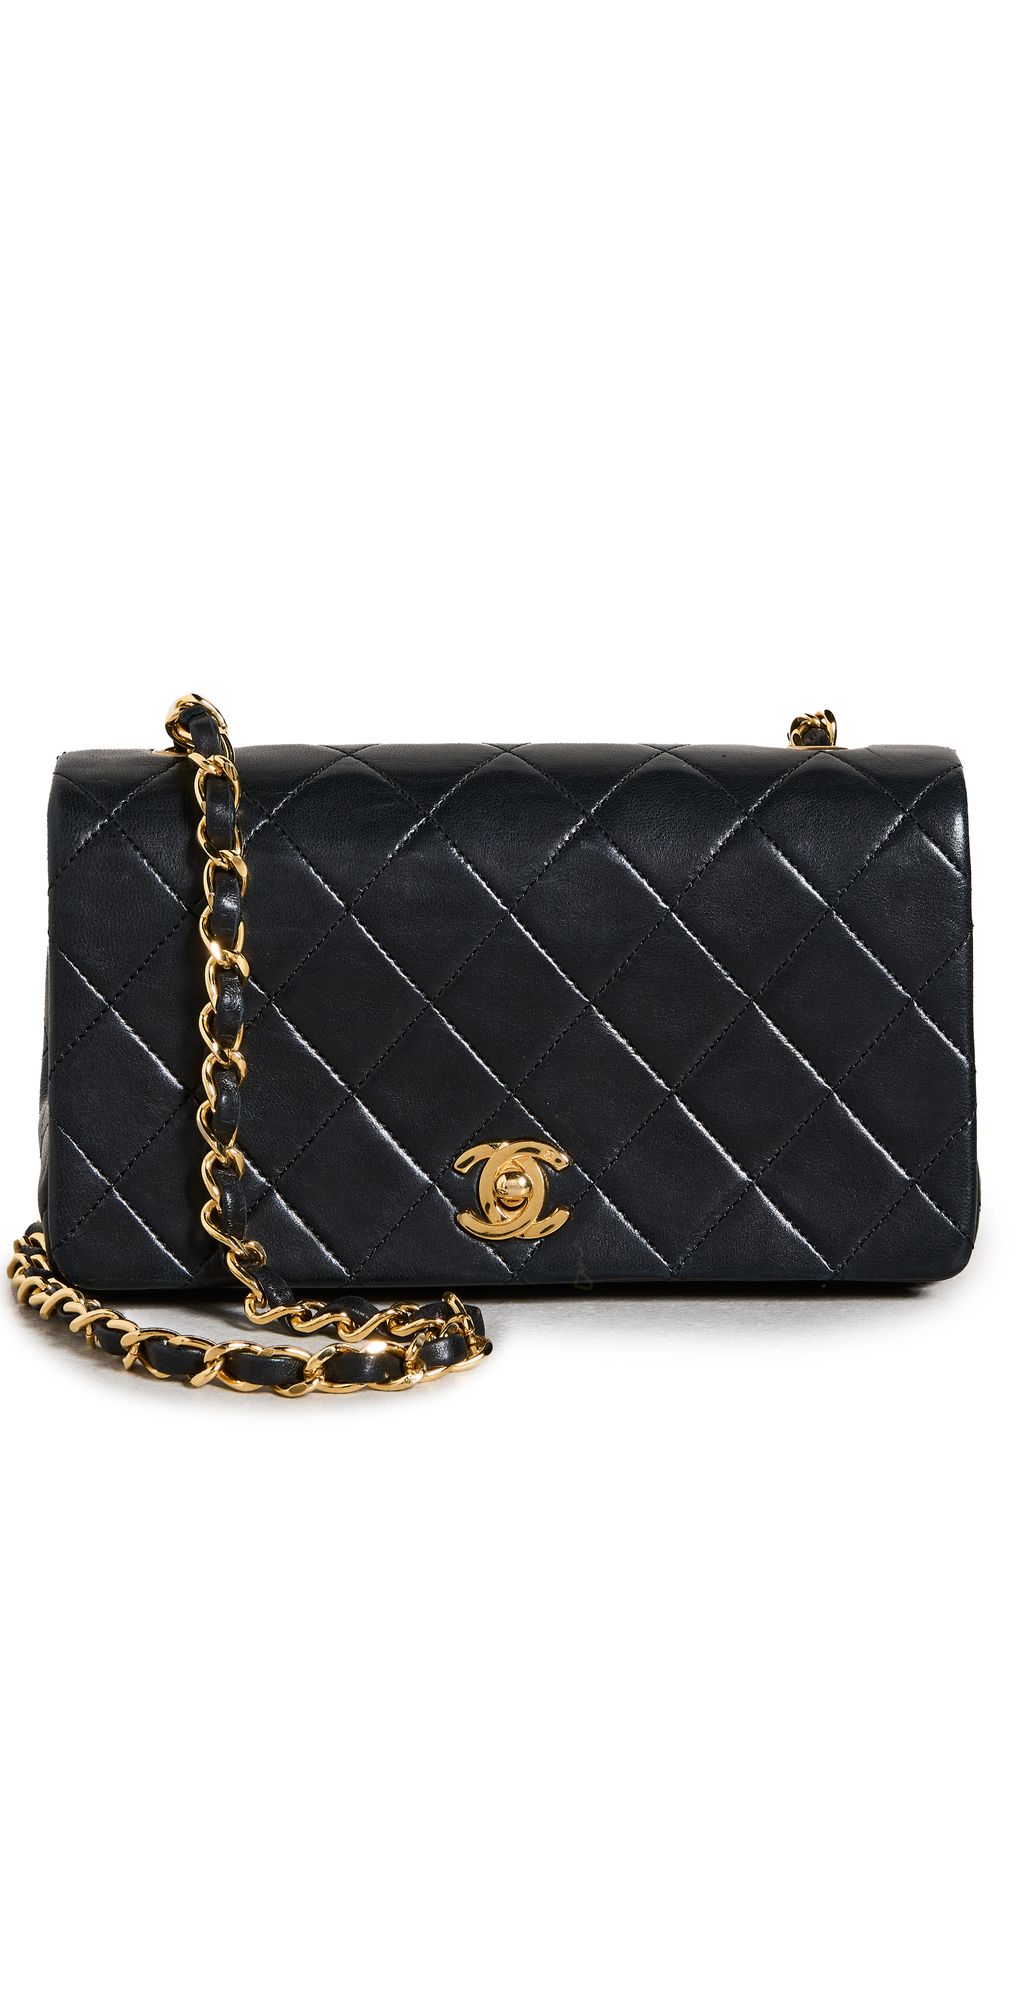 What Goes Around Comes Around Chanel Black Flap Bag | Shopbop